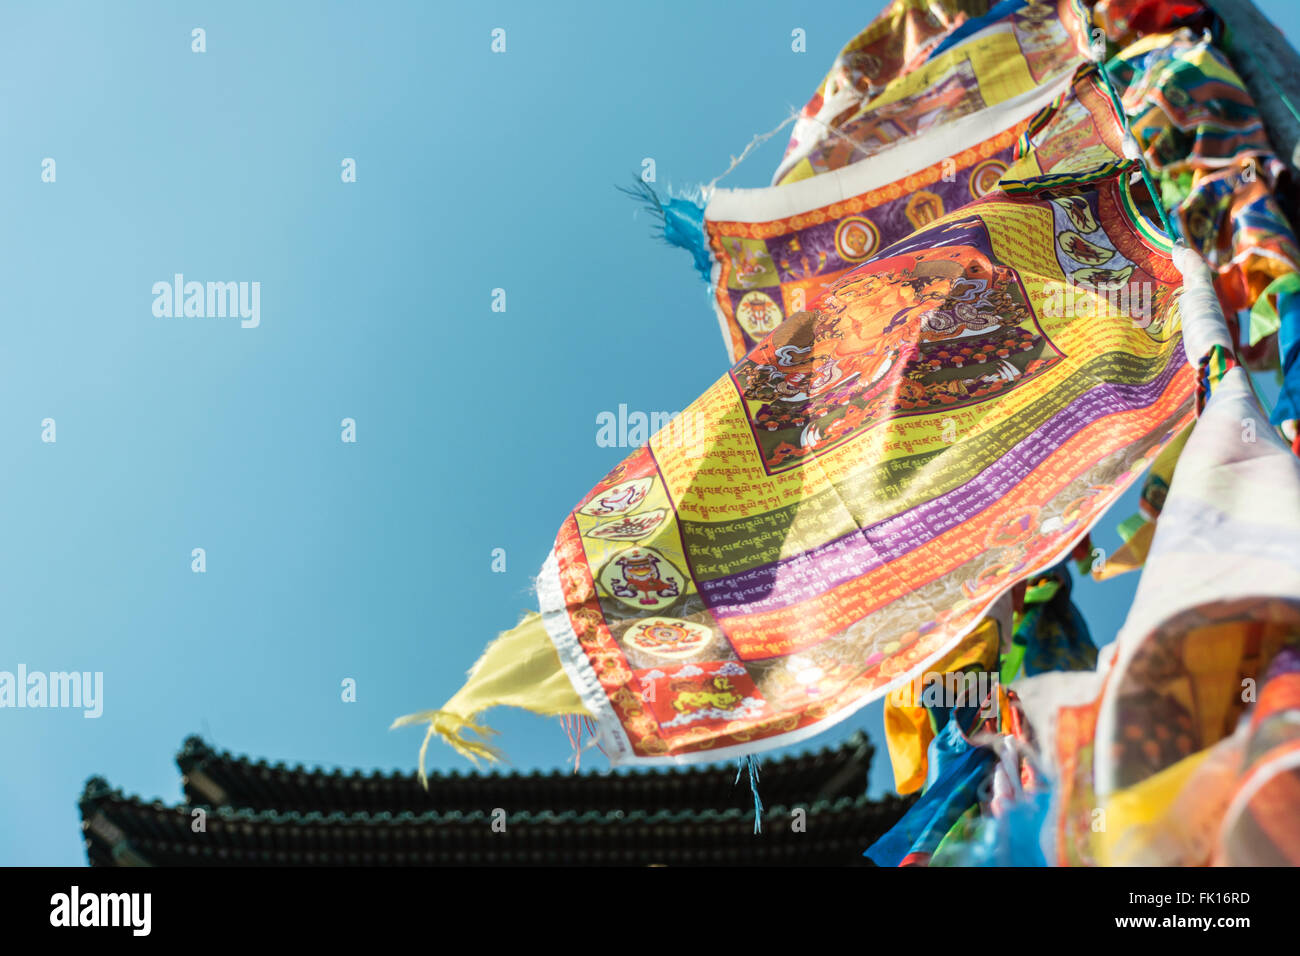 Buddhist texts on Tibetan flags before a China temple Stock Photo